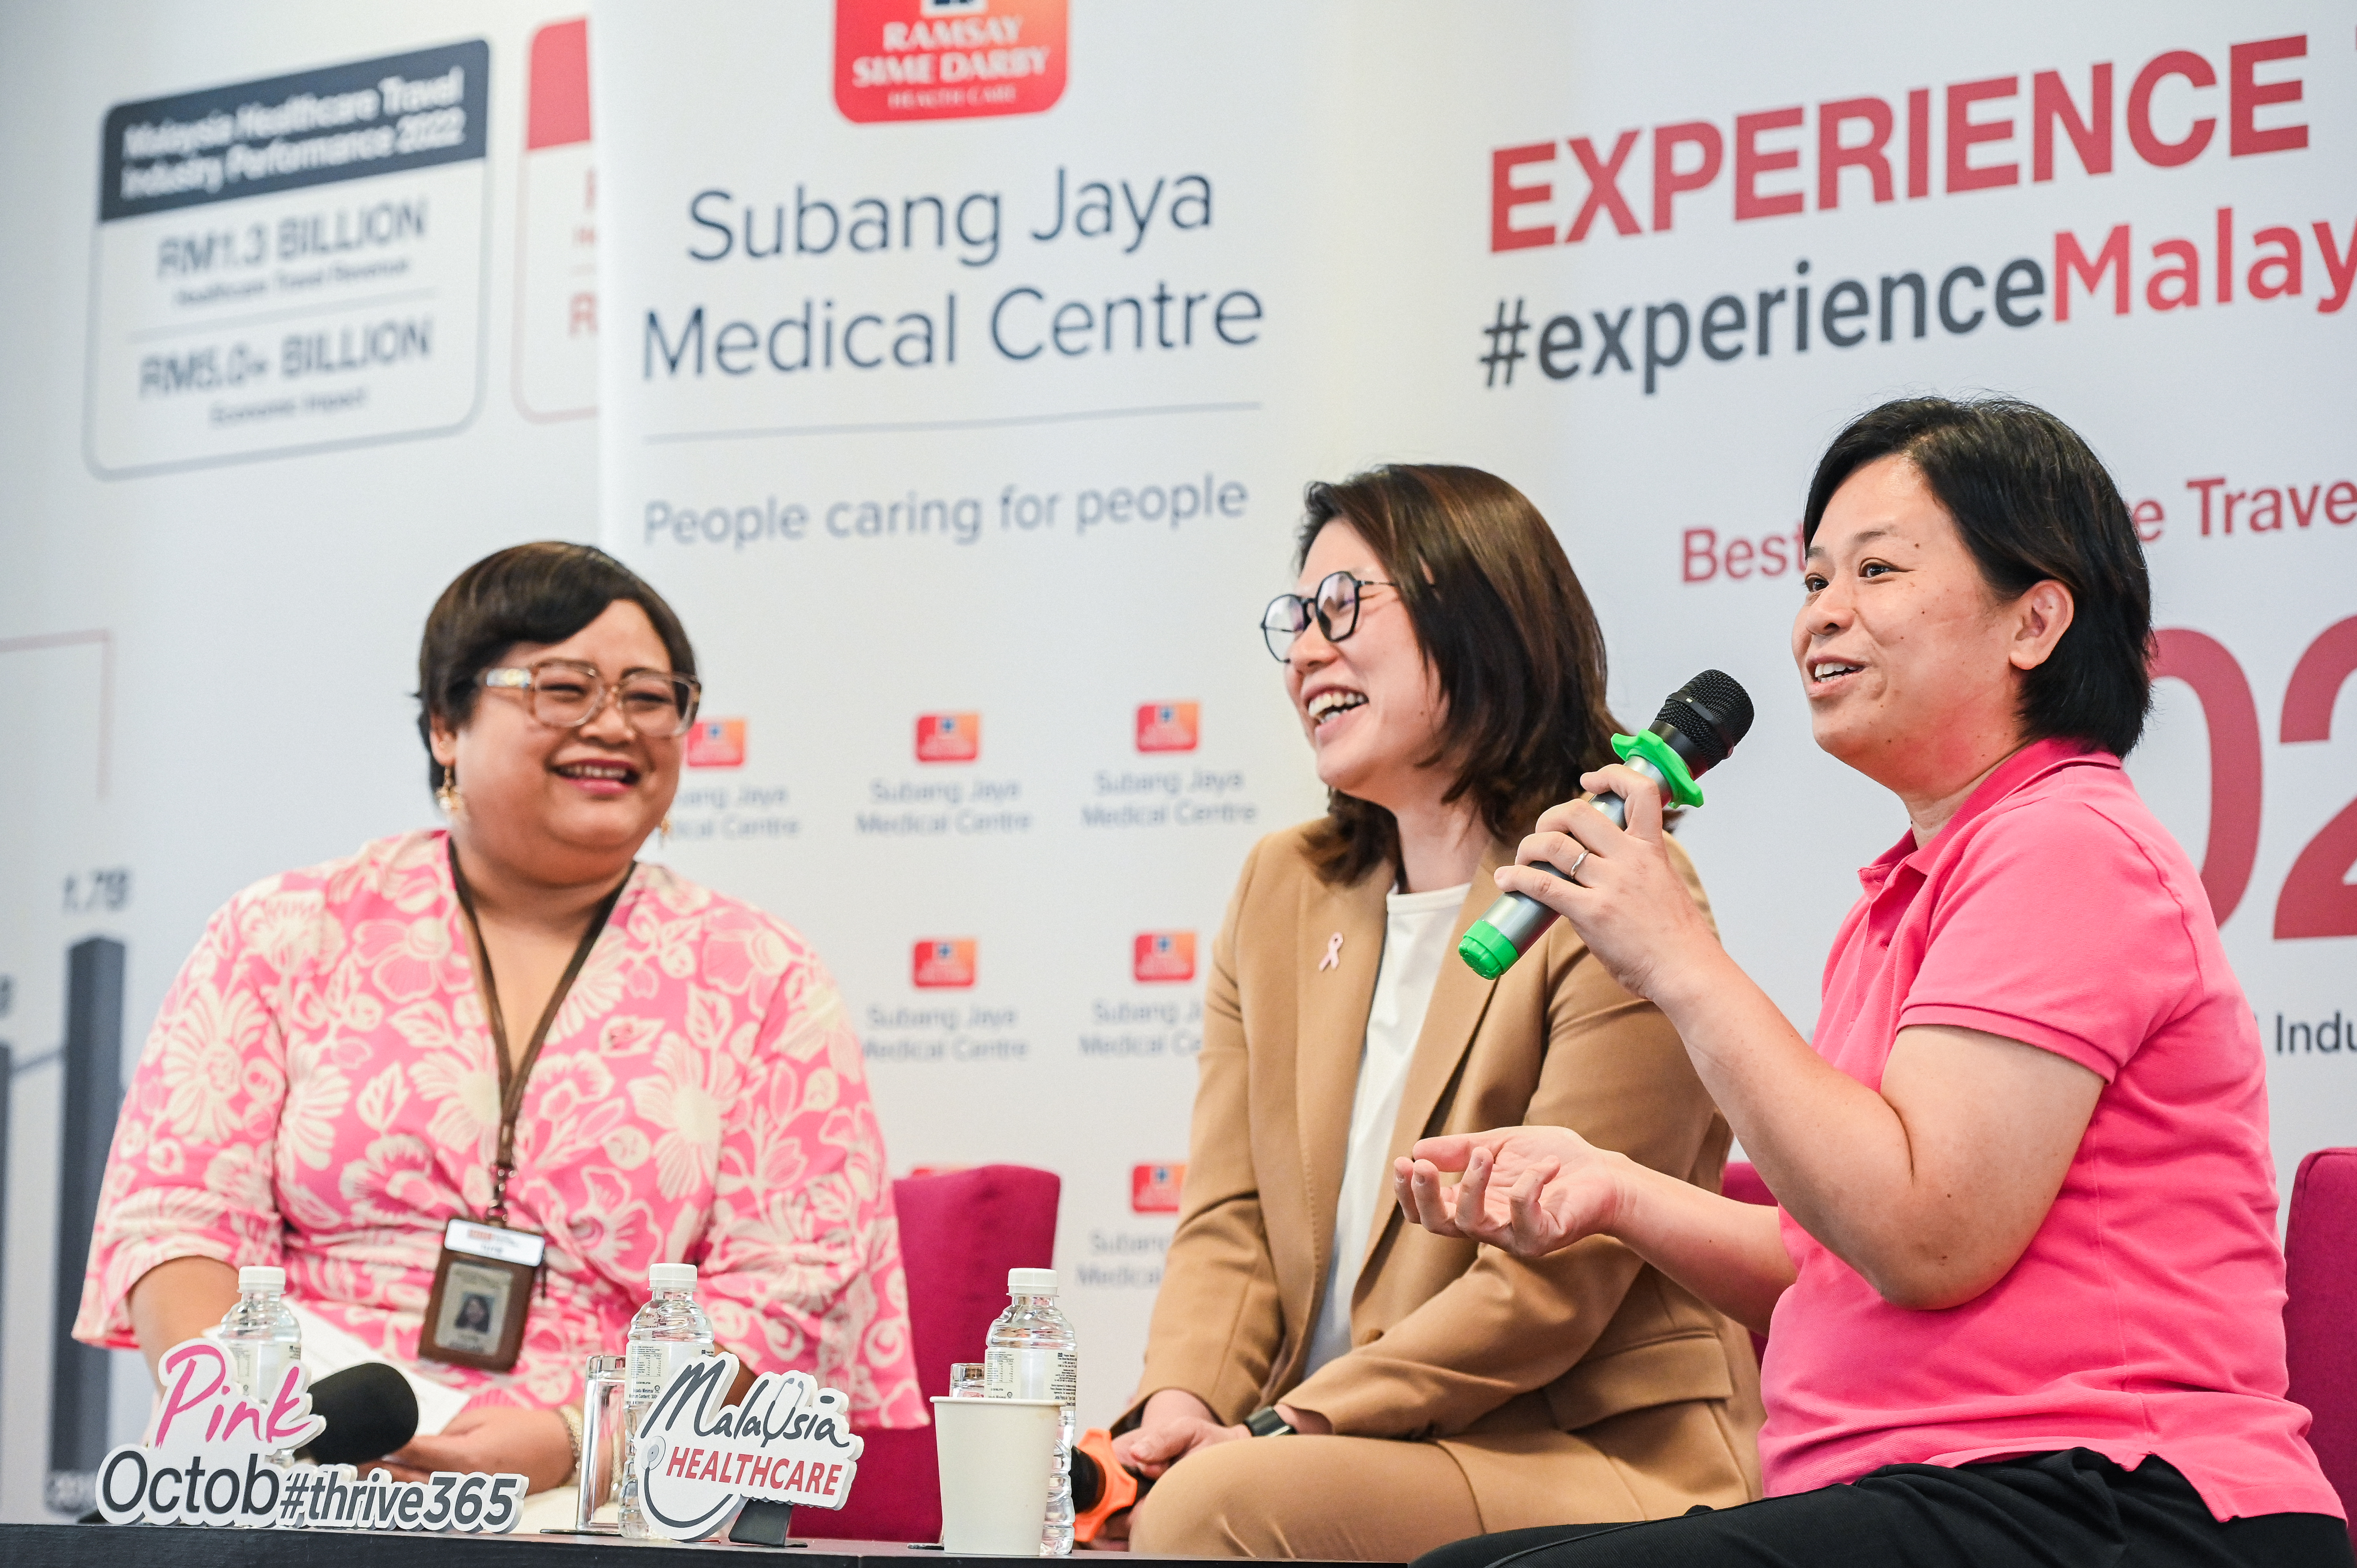 (From Left) Ms. Tutie Ismail, Vice President of Communications at MHTC; Dr. Teh Mei Sze, Consultant Breast Surgeon (Oncoplastic) Subang Jaya Medical Centre (SJMC); Ms. Yoon Sook Yee, Certified Genetic Counsellor Subang Jaya Medical Centre (SJMC) at MHTC Breast Cancer Awareness Day “Thrive 365”.